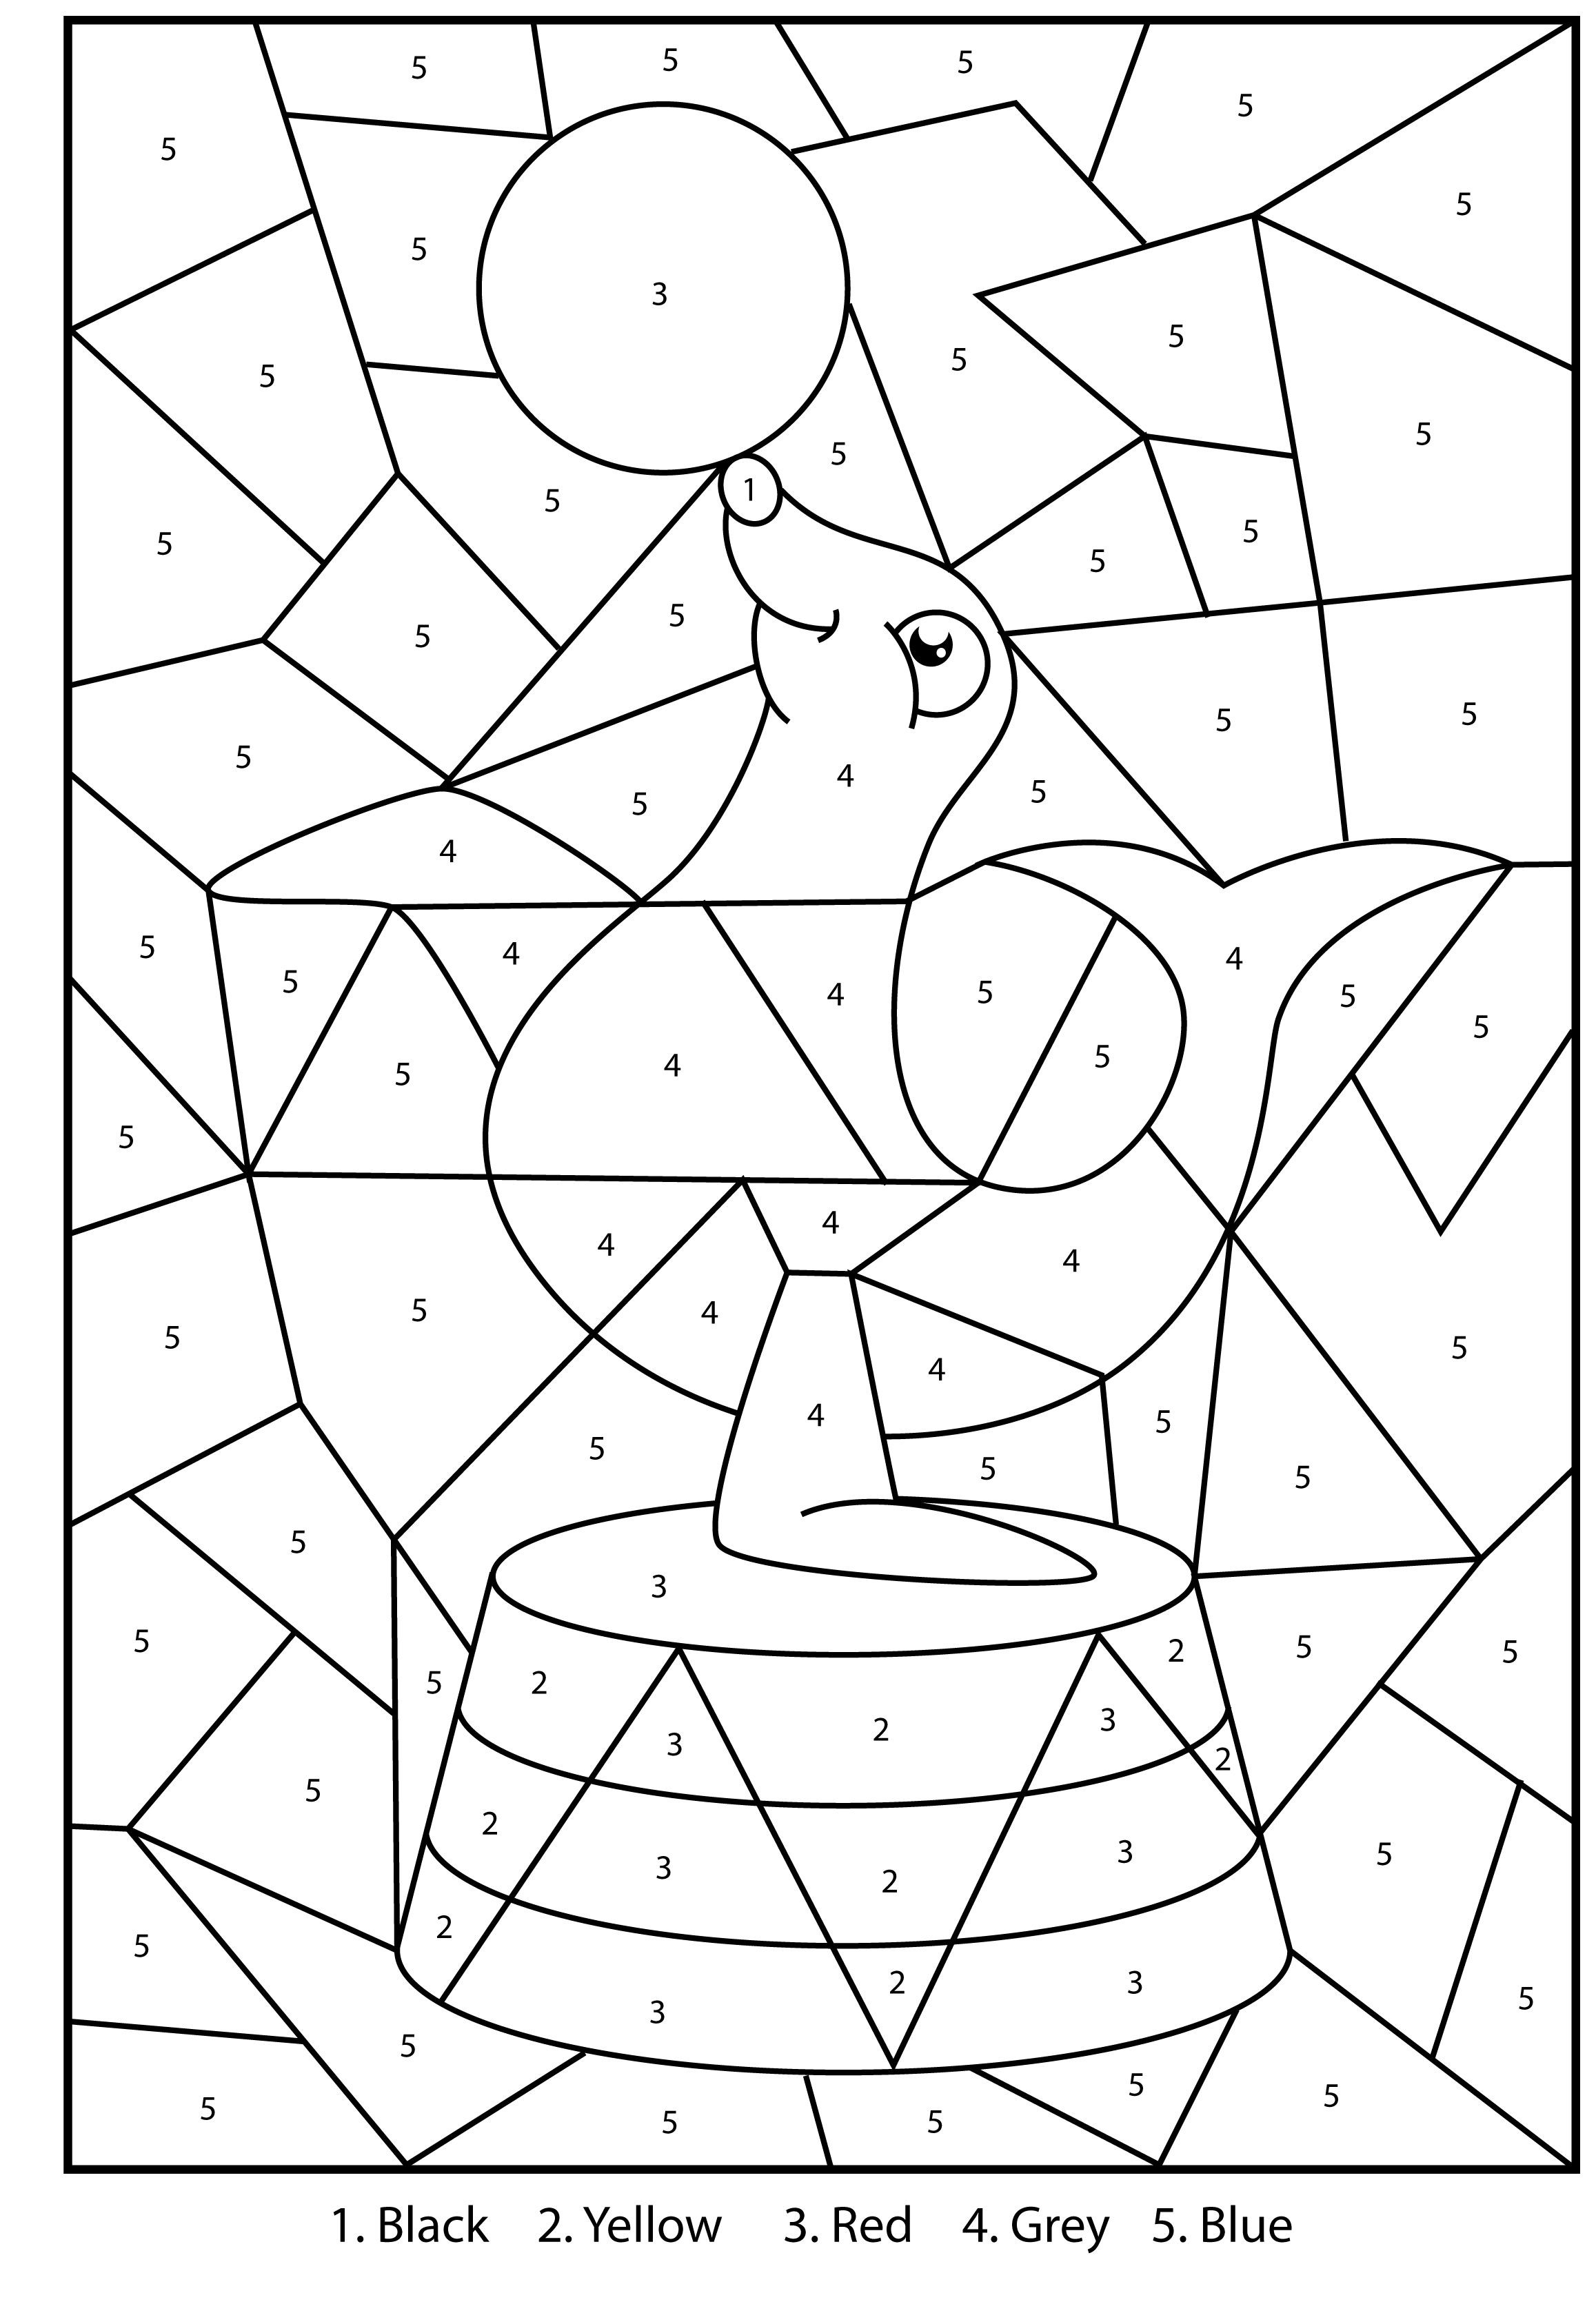 30-of-the-best-ideas-for-coloring-by-number-pages-for-boys-home-inspiration-and-ideas-diy